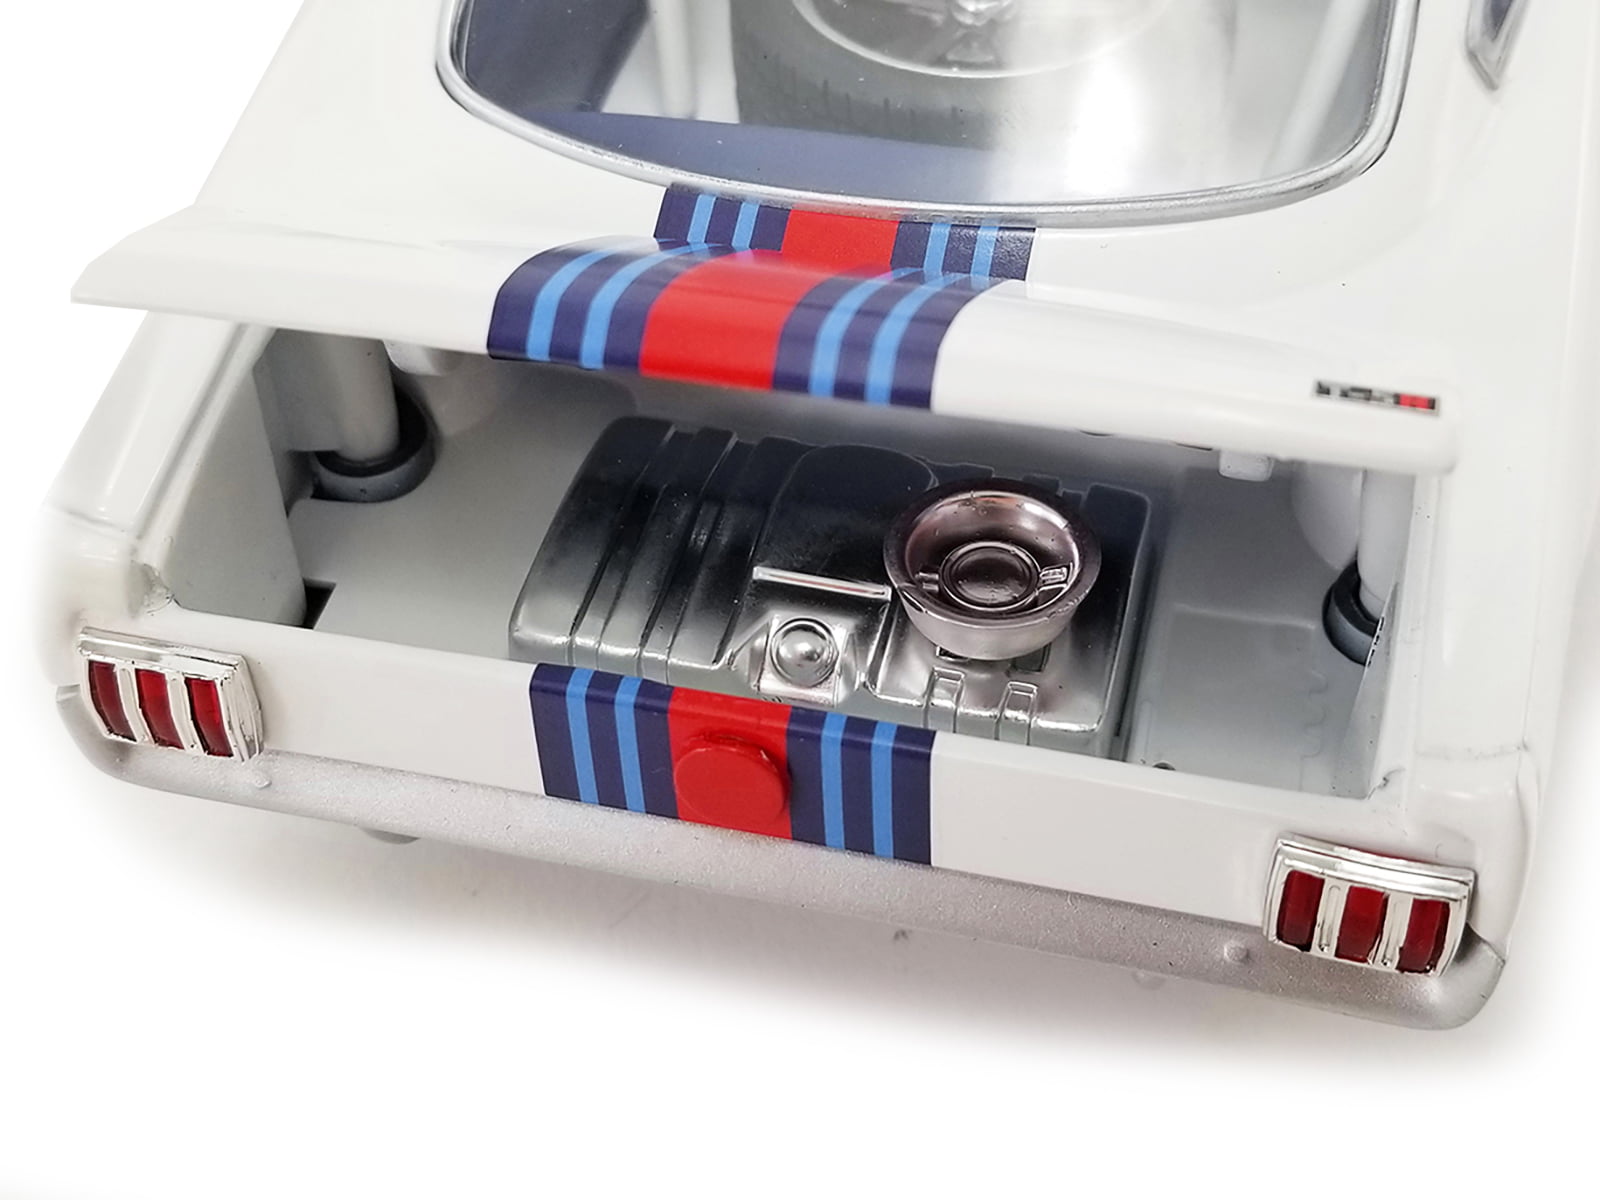 Picture of ACME A1801853 White with Red & Blue Stripes Le Mans Limited Edition to 1176 Pieces Worldwide 1 by 18 Scale Diecast Model Car for 1965 Shelby GT350R Street Fighter No.14